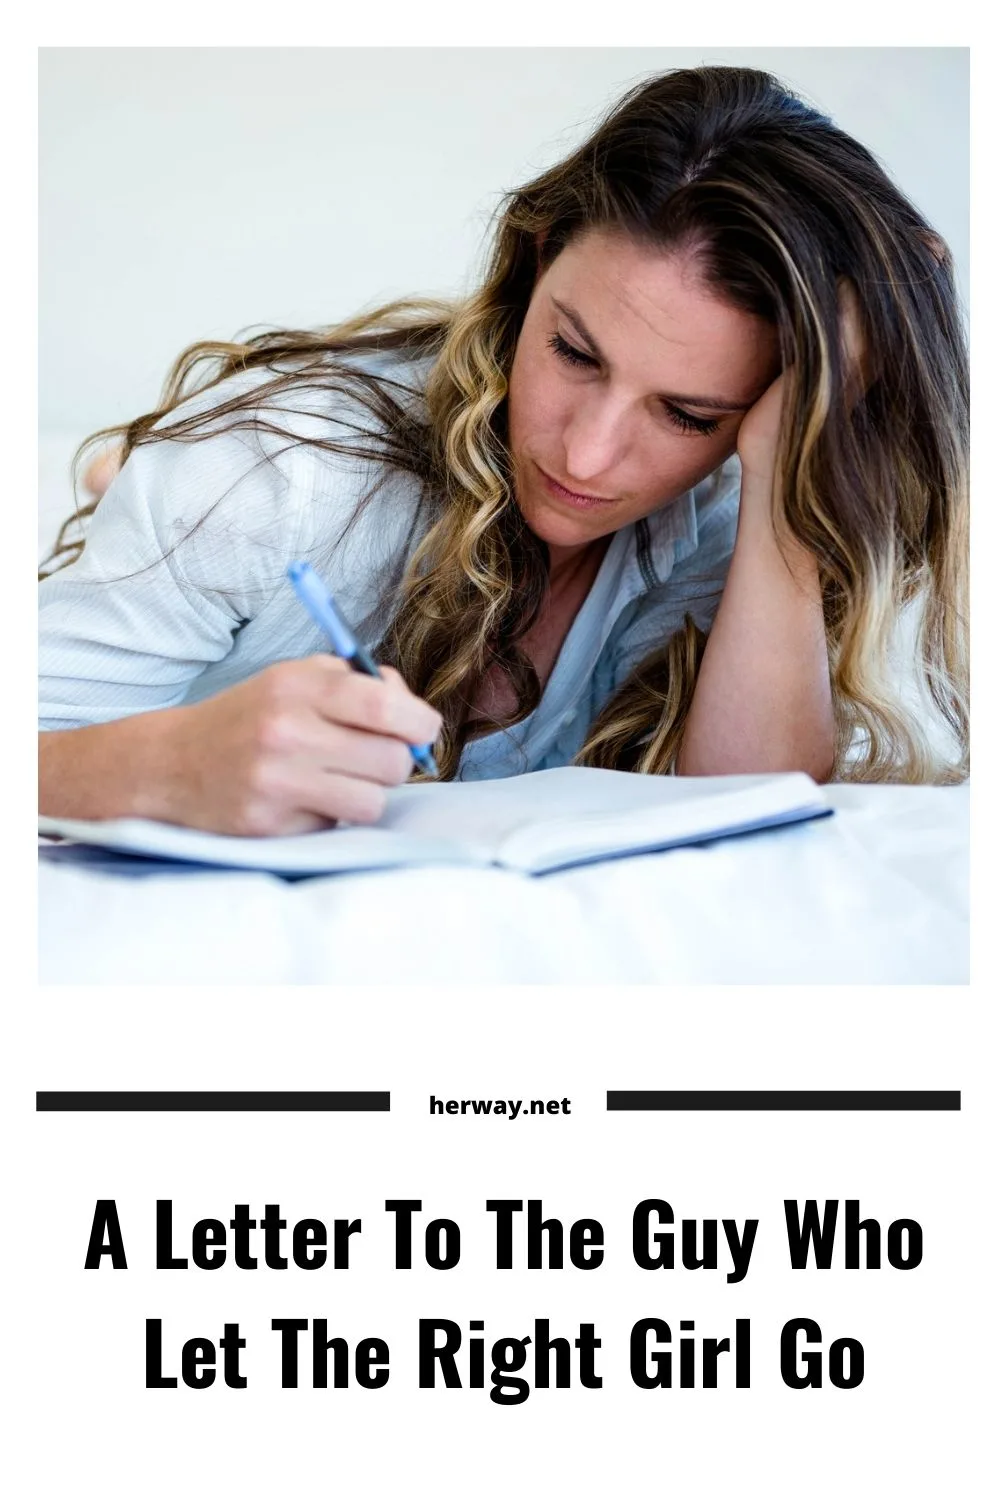 A Letter To The Guy Who Let The Right Girl Go